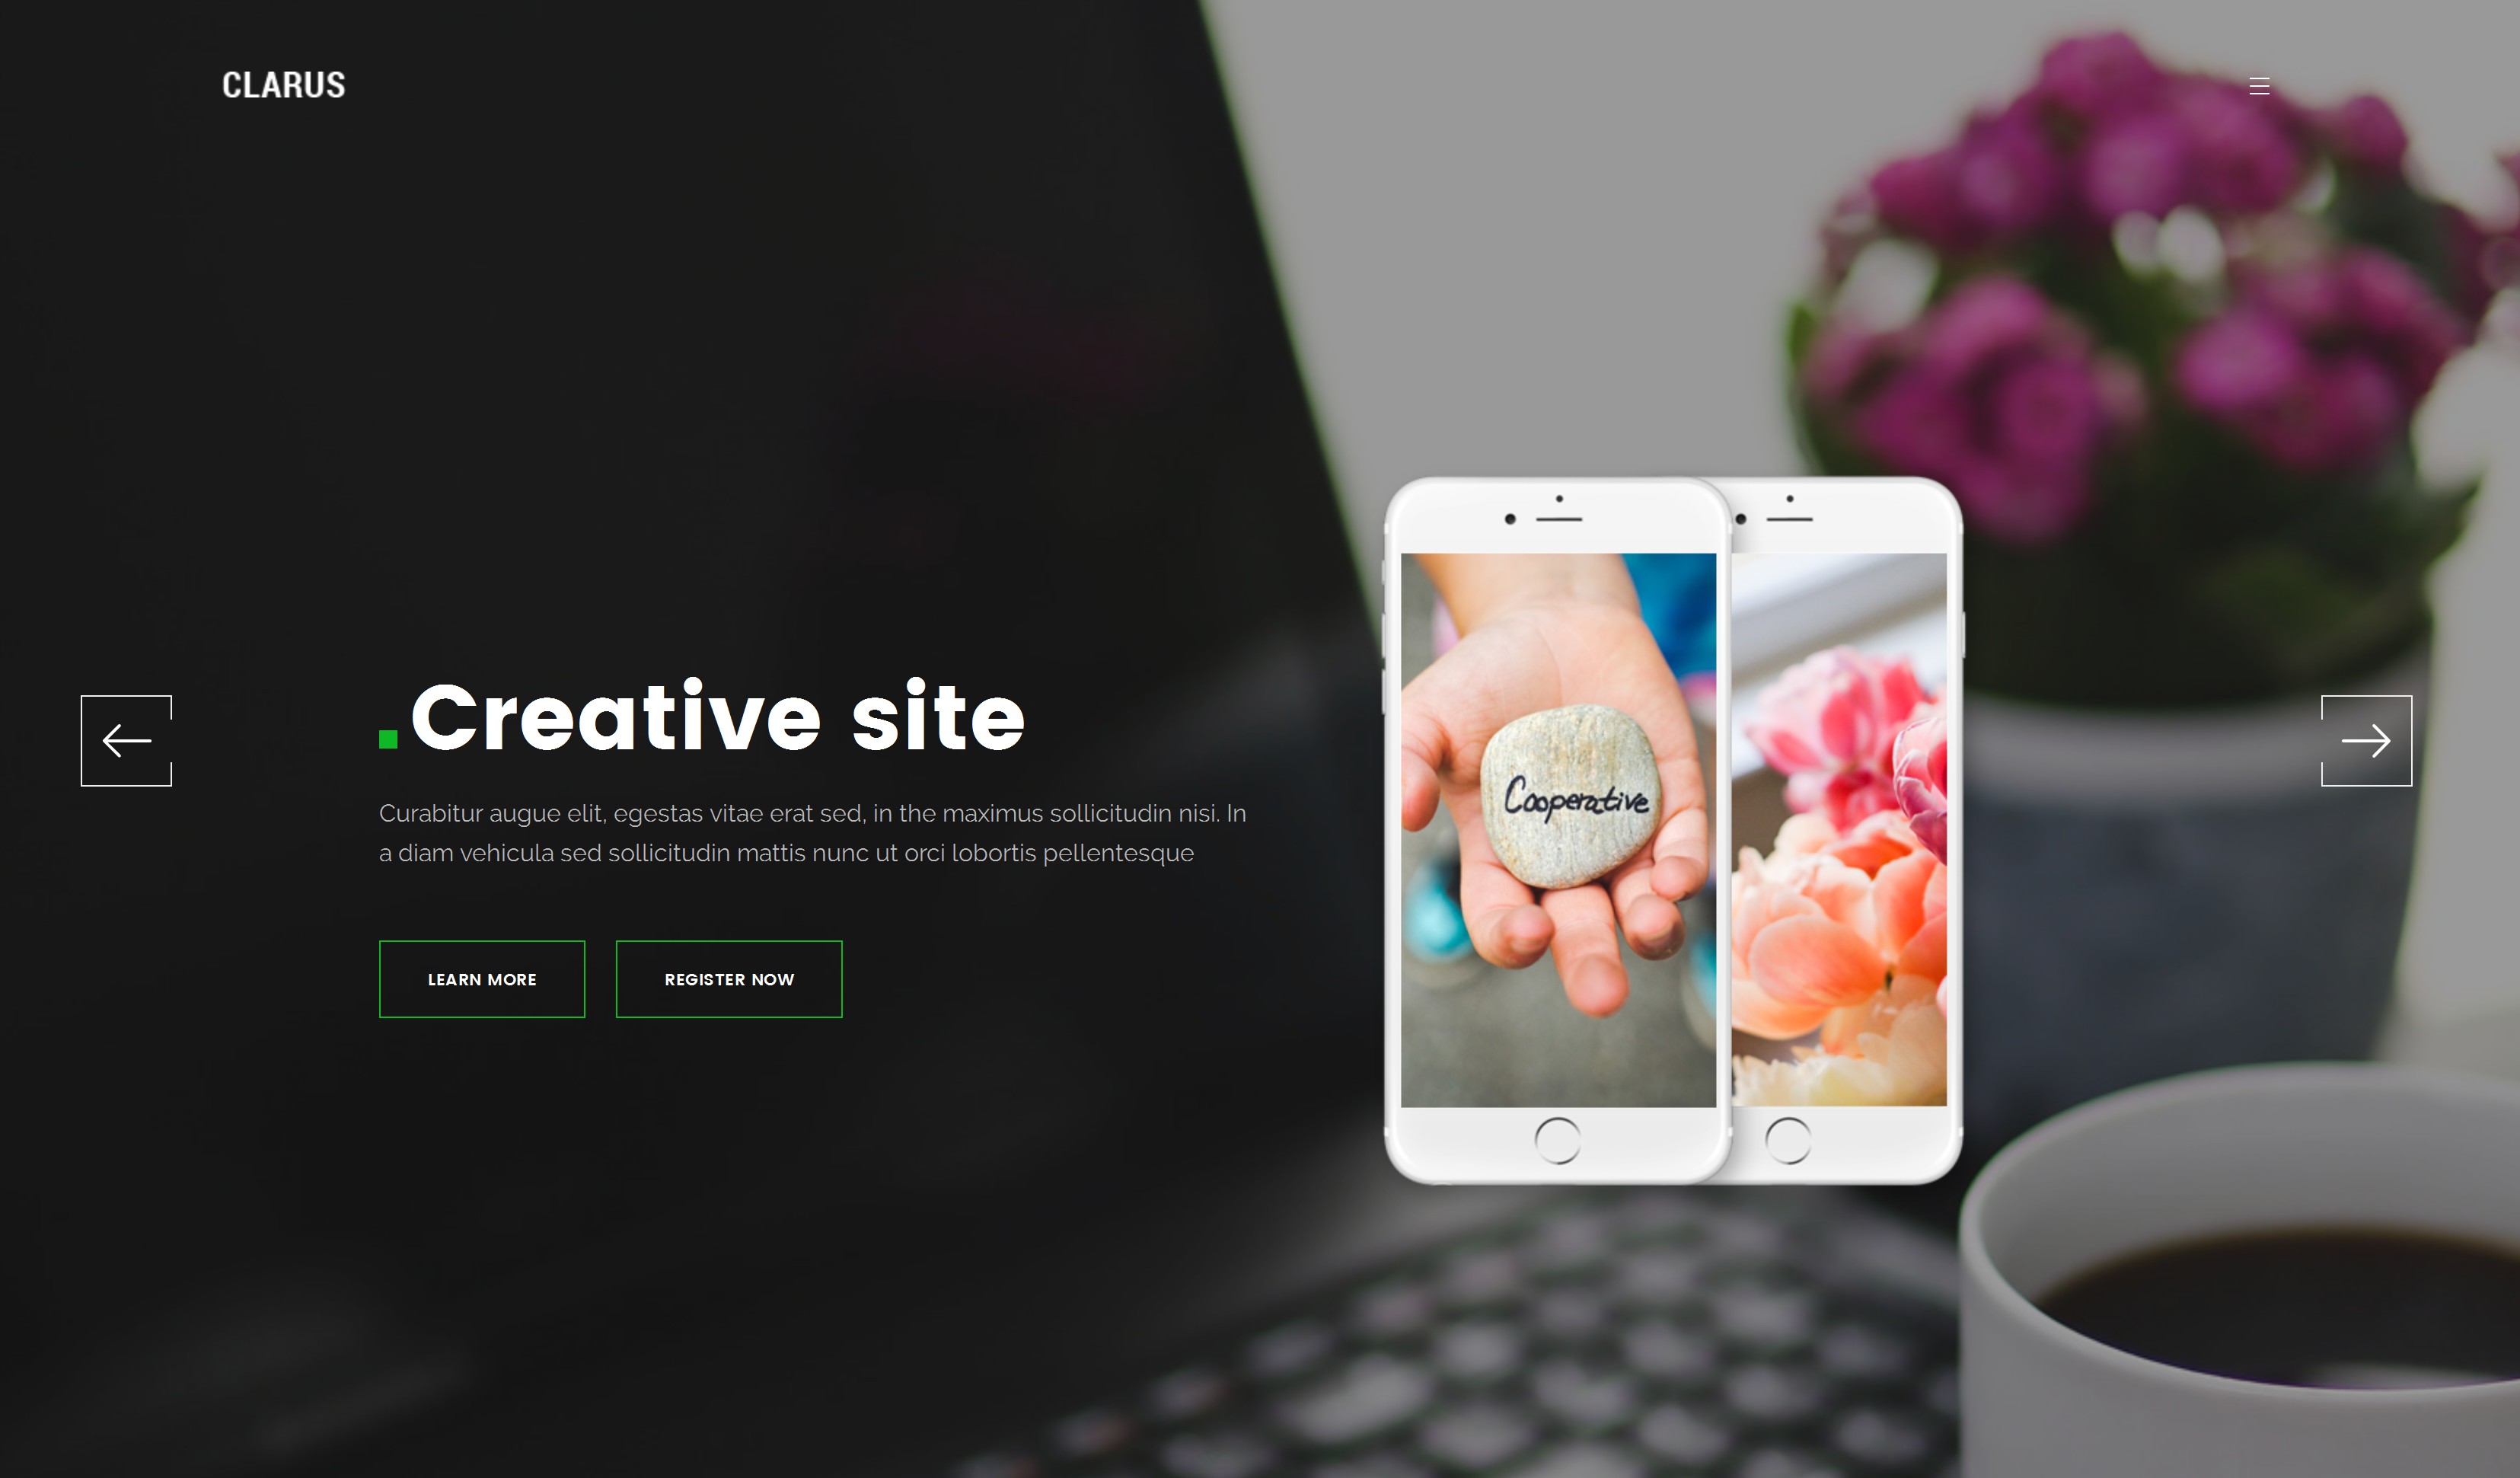 Free Download Bootstrap Image Gallery Theme